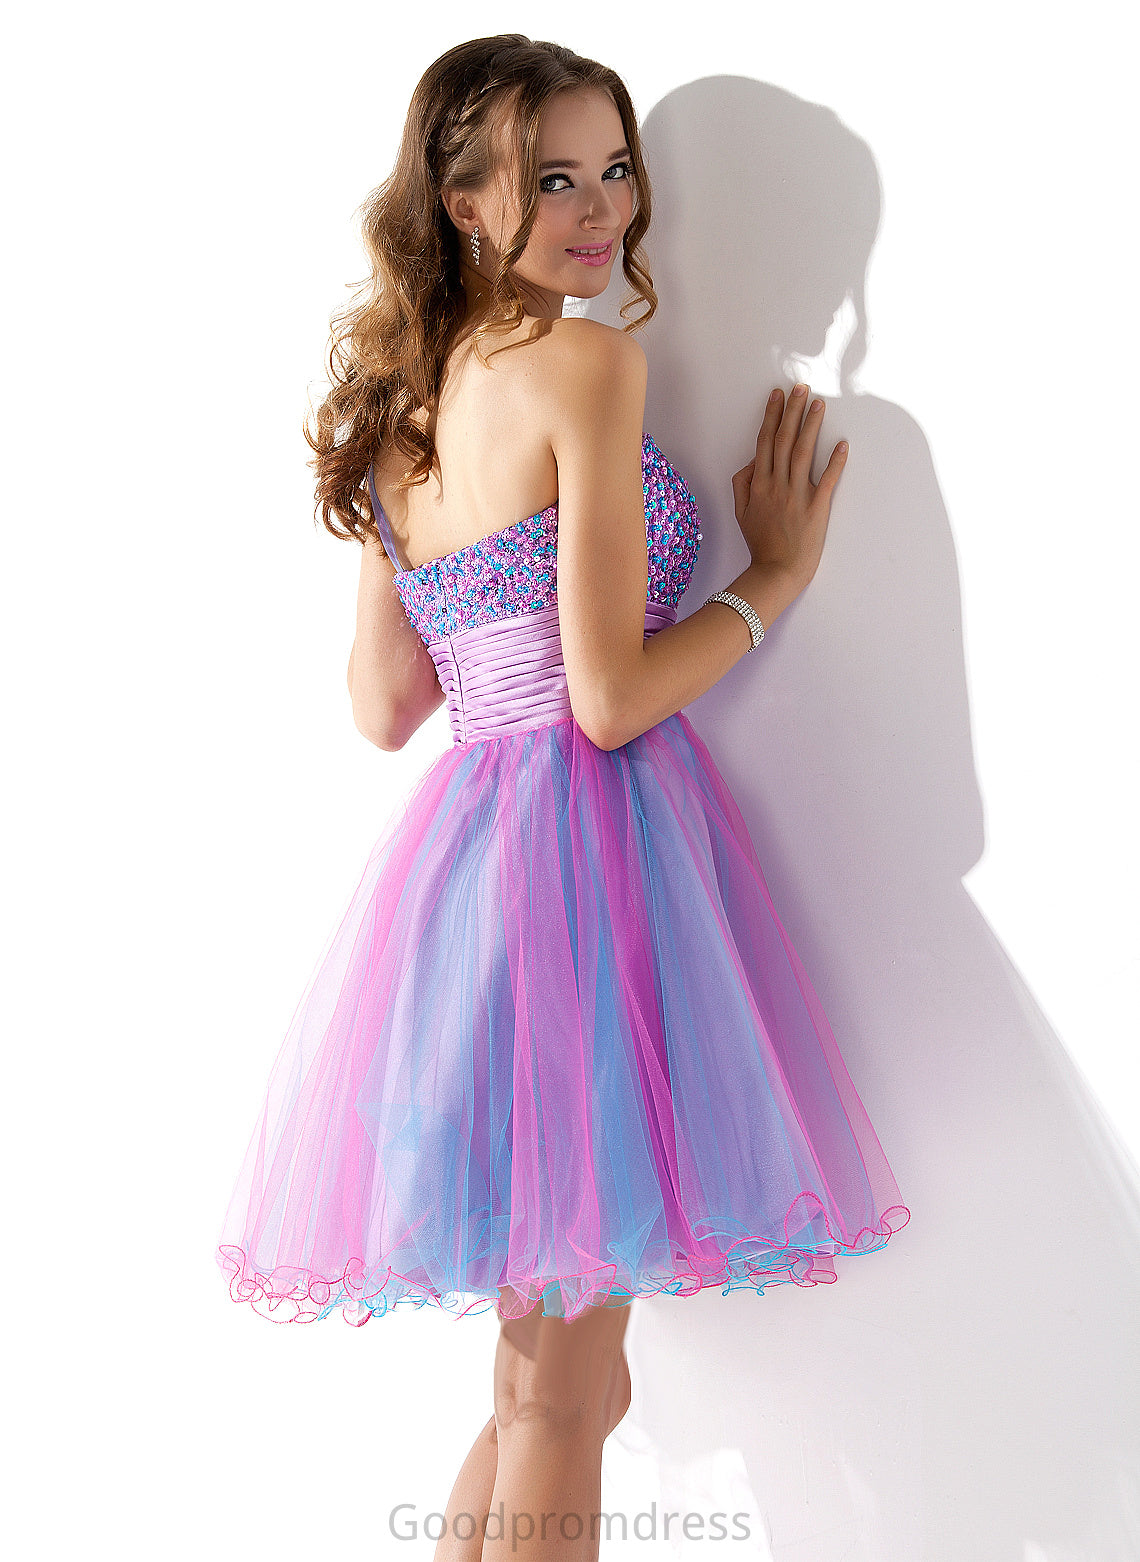 Dress A-Line Ruffle Homecoming Dresses With Homecoming Sequins One-Shoulder Beading Natalia Short/Mini Tulle